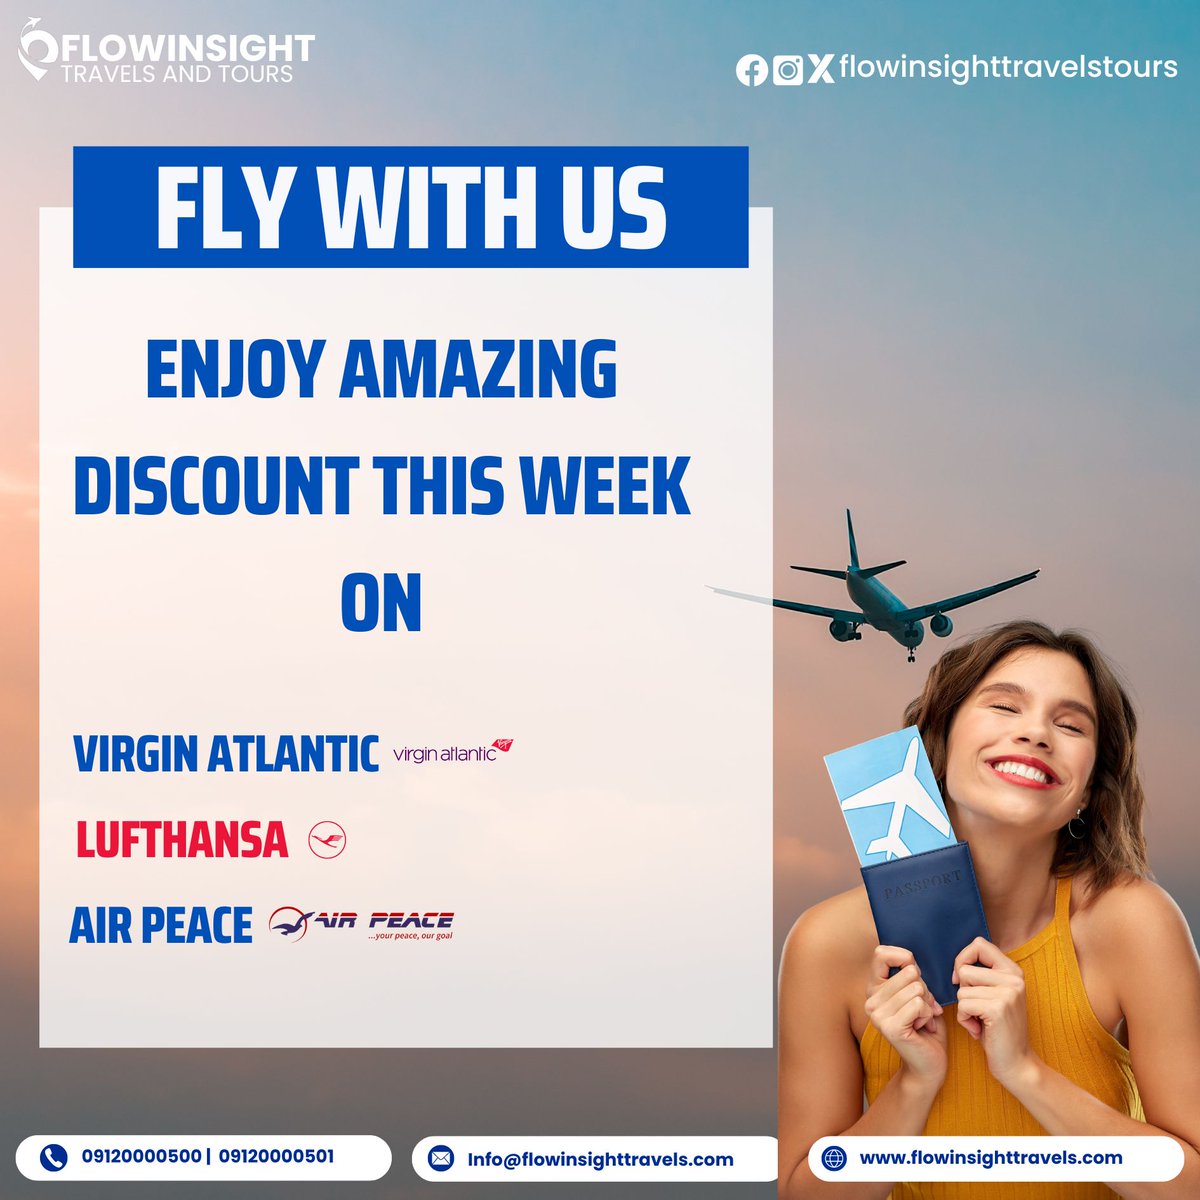 That’s right! Enjoy amazing discount when you fly any of these airlines!

Don’t be left out, reach out today and secure your slots

P.s terms and conditions applies

For Booking and Reservation

Send a Dm

Or

Call

09120000501
09120000500

#discount
#flightdeals
#amazingoffer